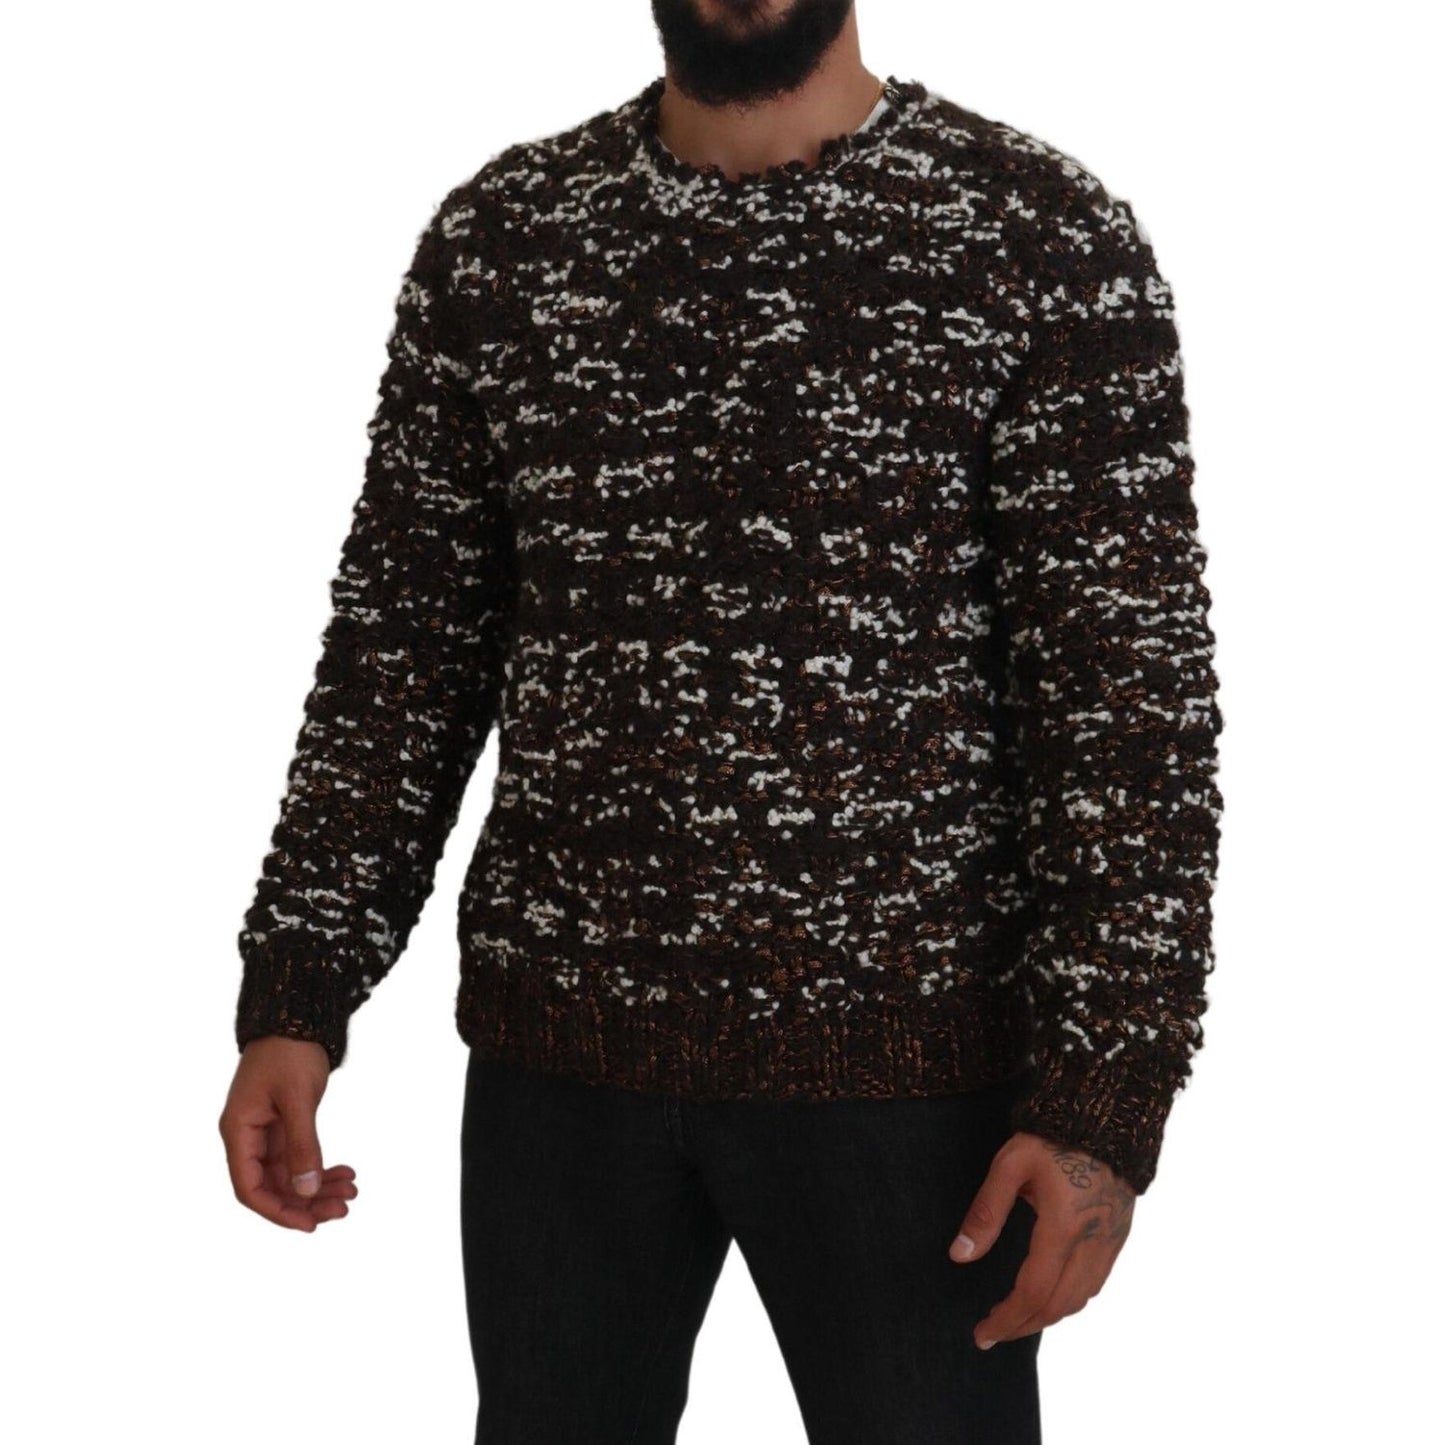 Dolce & Gabbana Elegant Bronze Knit Pullover Sweater brown-knitted-wool-fatto-a-mano-sweater